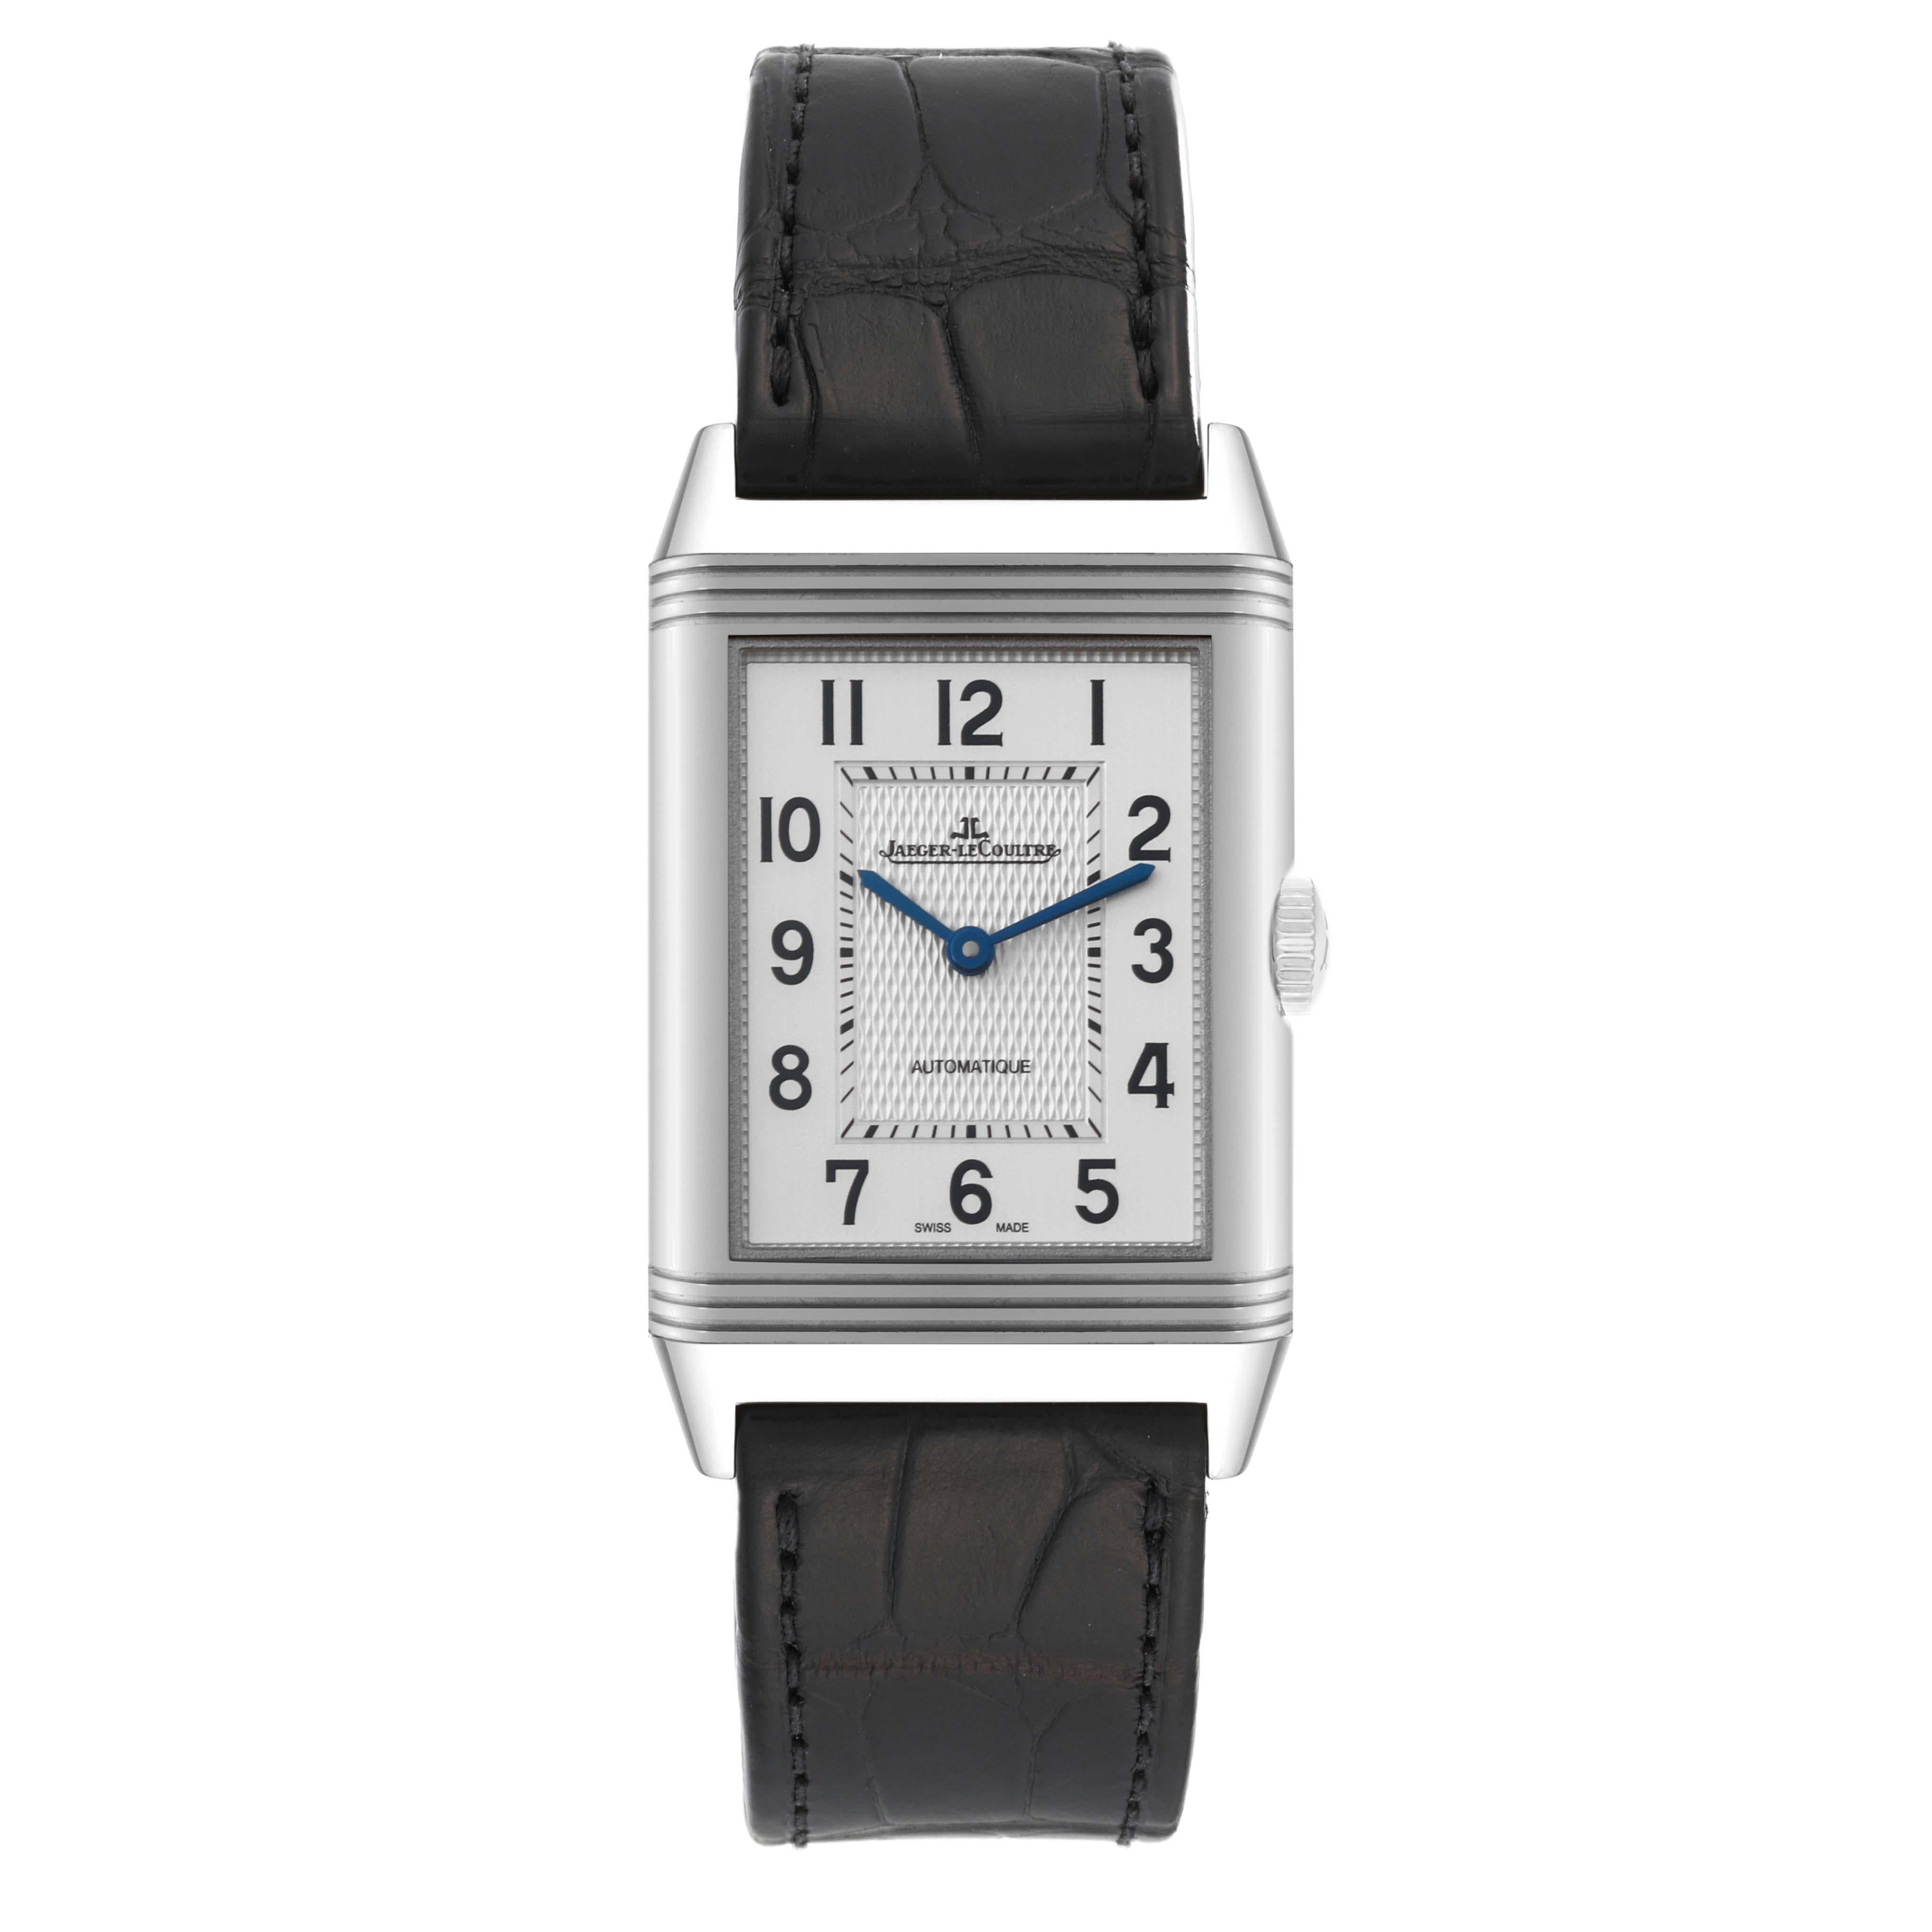 Jaeger LeCoultre Reverso Classic Steel Mens Watch 214.8.S5 Q3828420 Box Papers. Automatic self-winding movement. Stainless steel rectangular rotating case, 45 mm x 27.4 mm. Case thickness: 8.5 mm. Solid case back. Stainless steel reeded bezel.